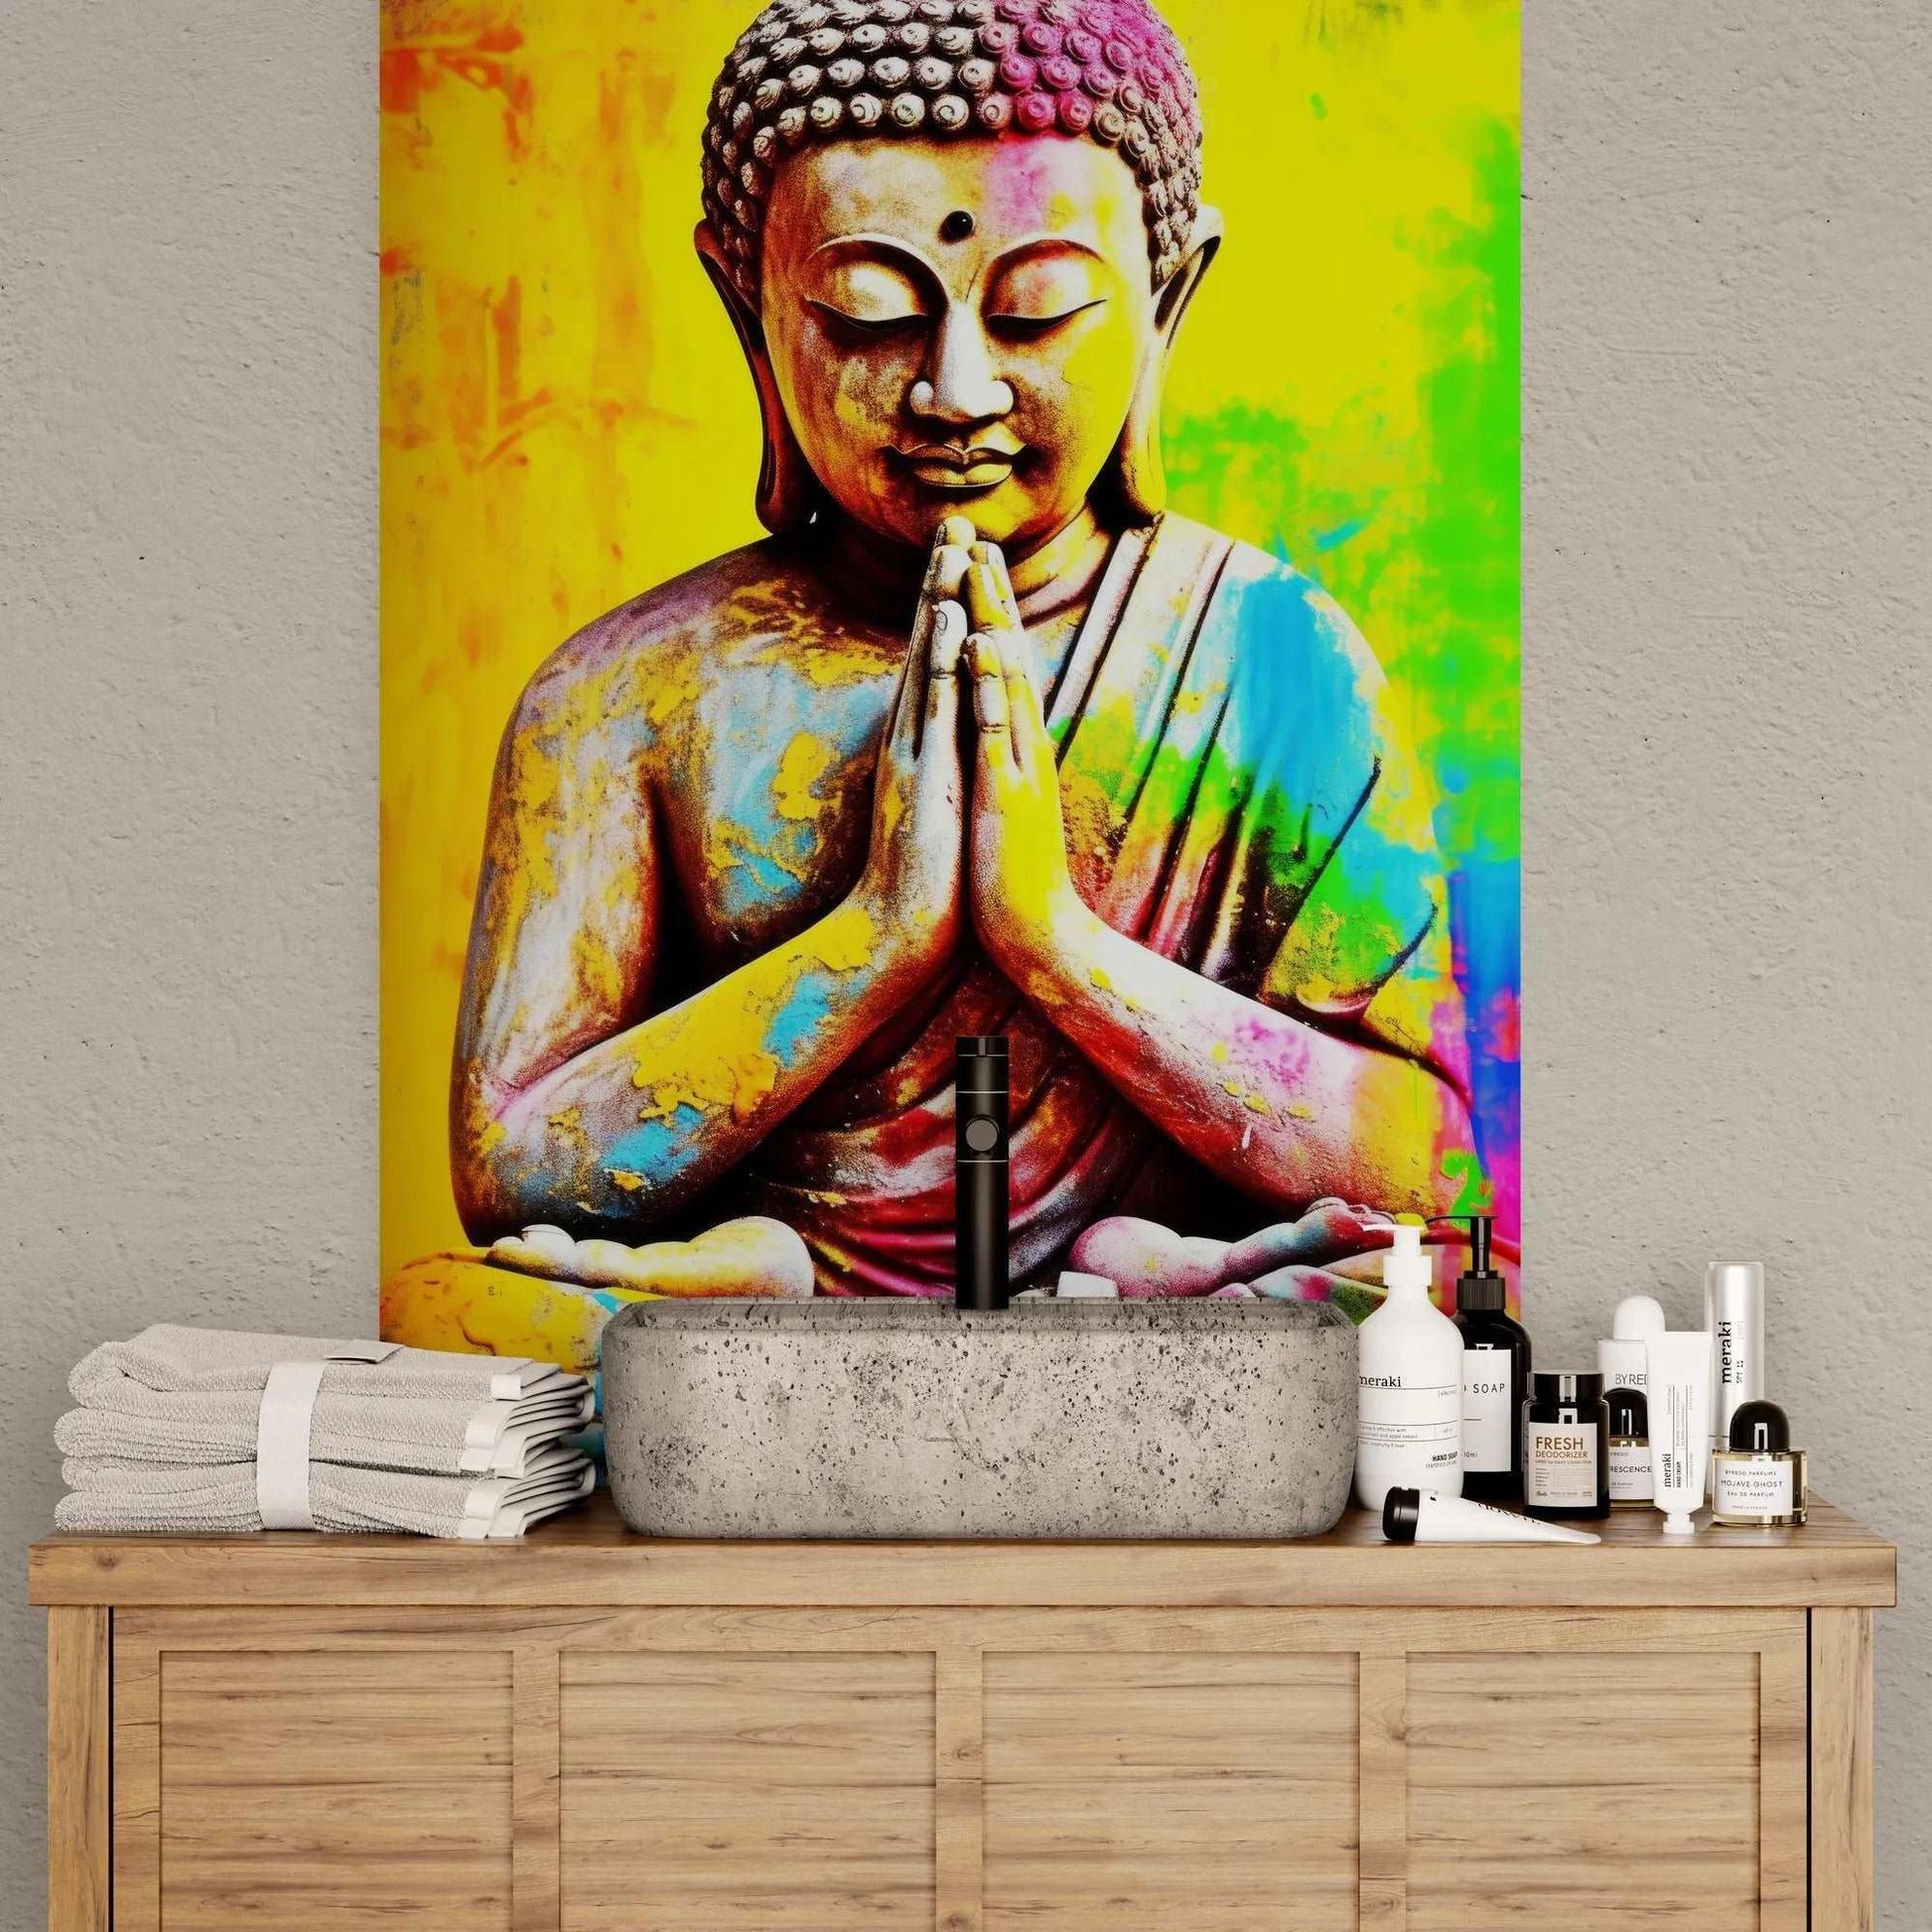 A vividly colored painting of a Buddha in a meditative pose with hands pressed together in a prayer gesture, displayed above a wooden sideboard with neatly stacked towels and skincare products